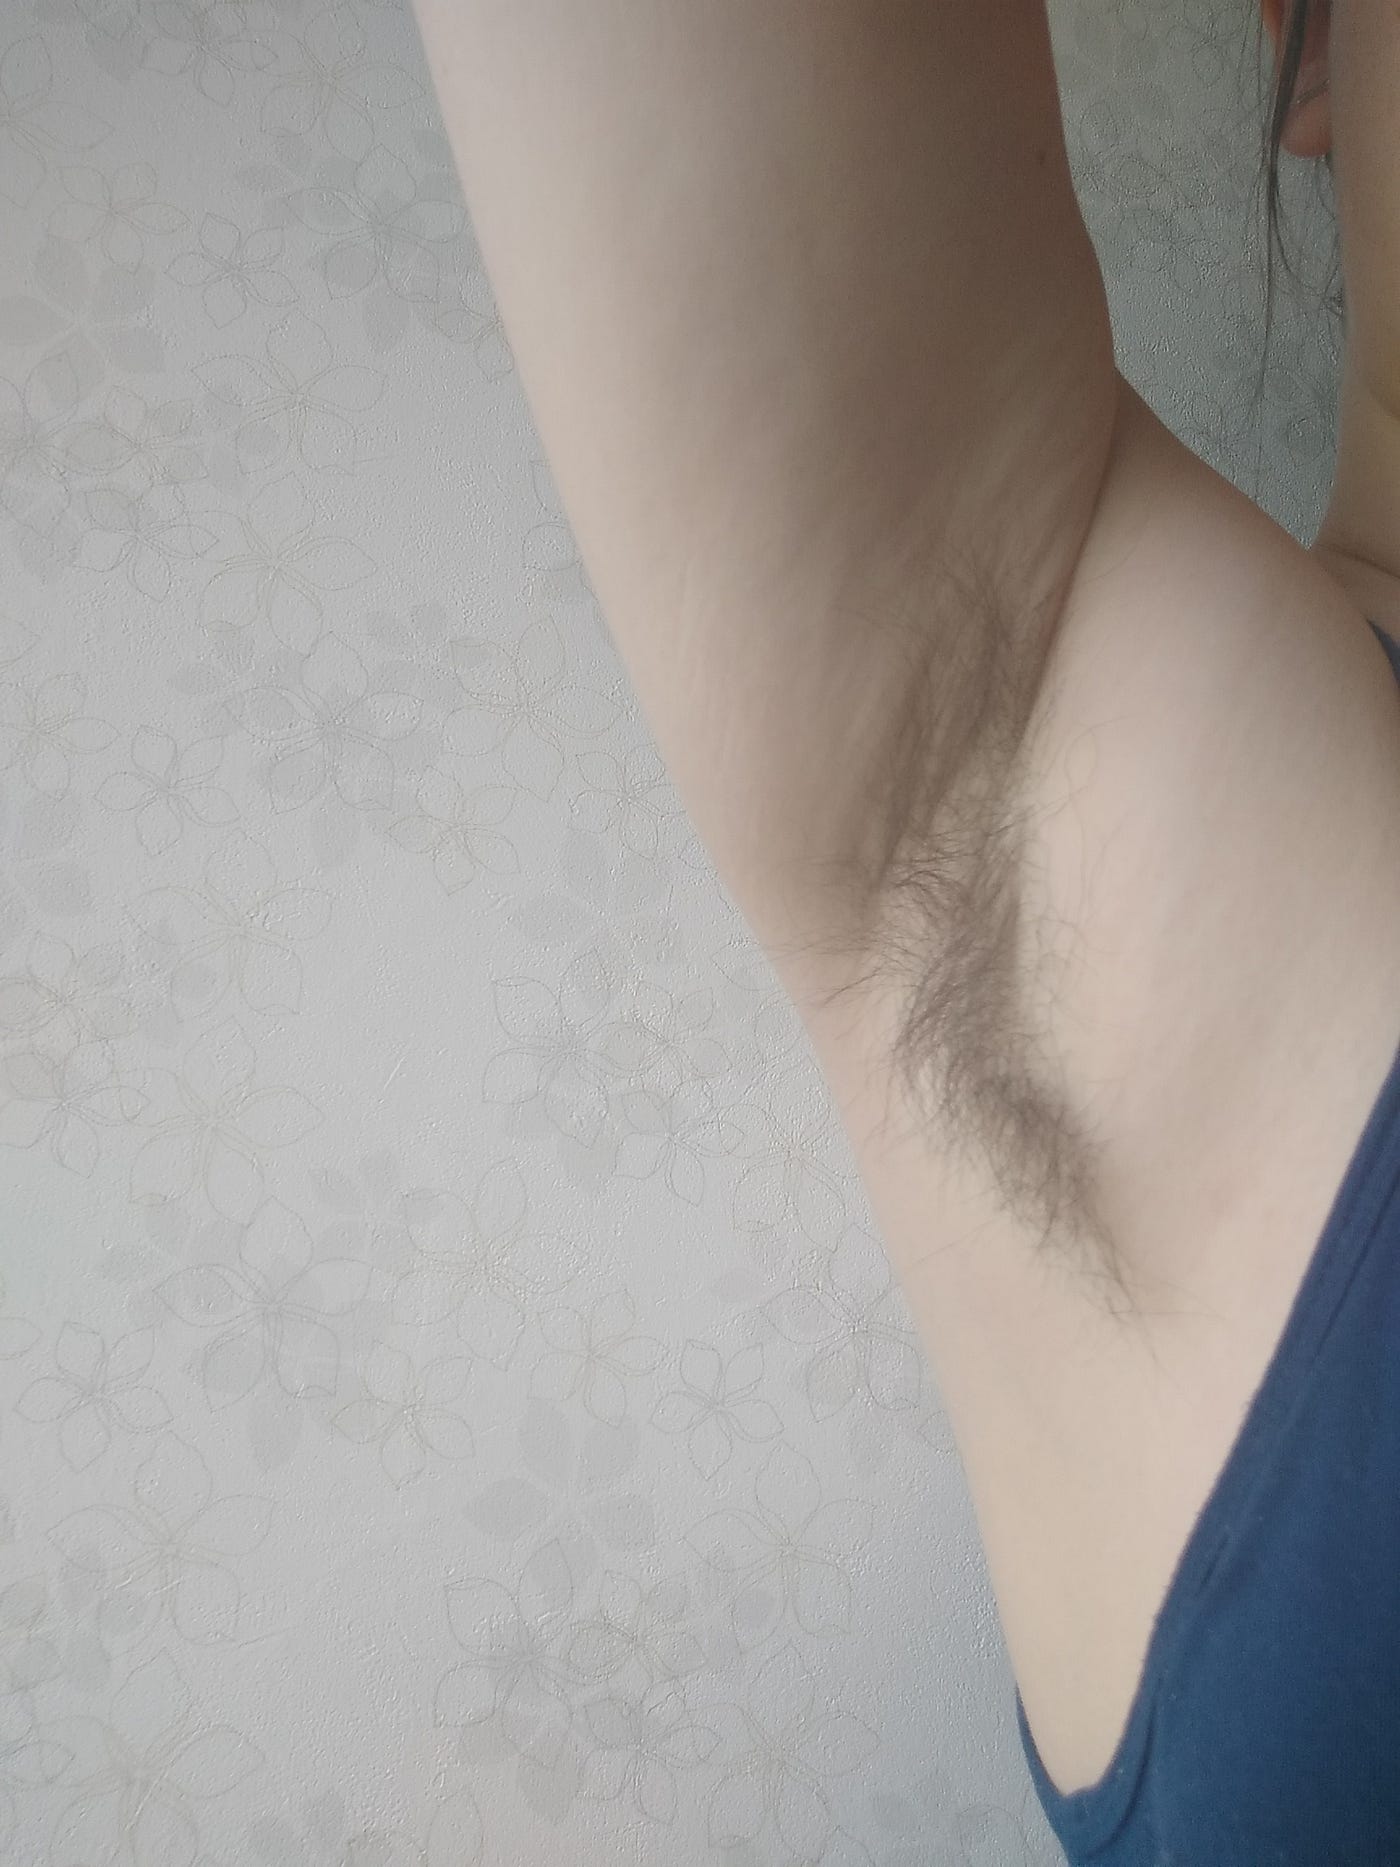 I havent shaved my armpits or legs for a year